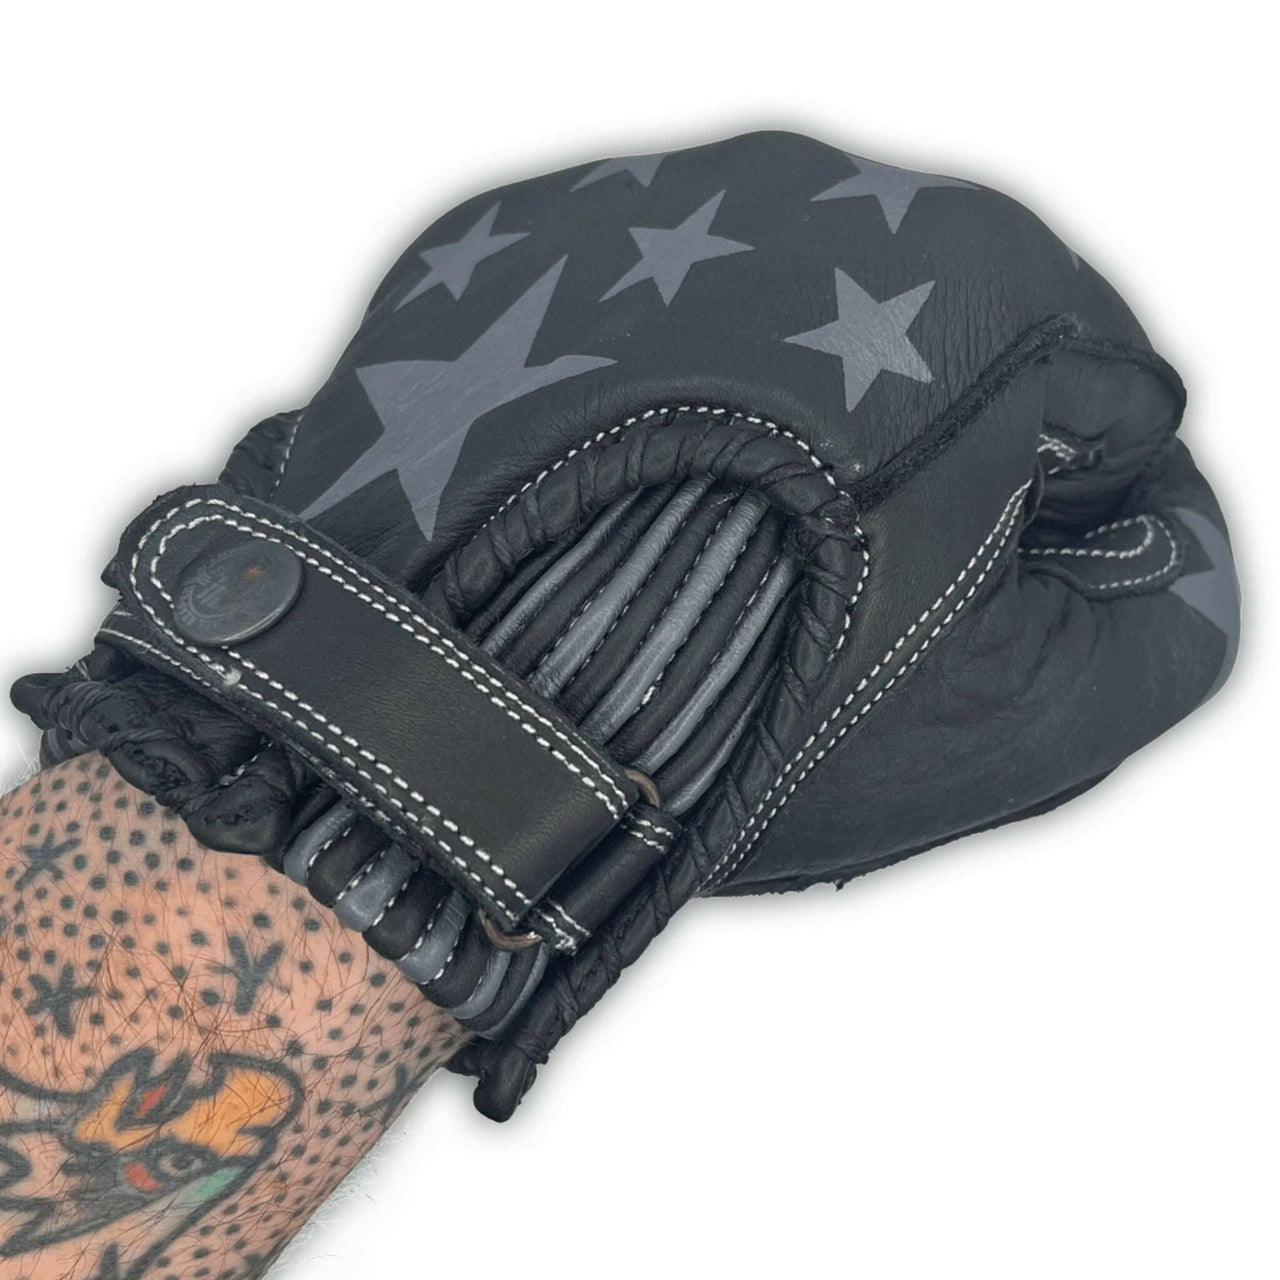 Leather Motorcycle Riding Gloves - Modern Roper - Grey Stars - Rebel Reaper Clothing CompanyLeather Gloves